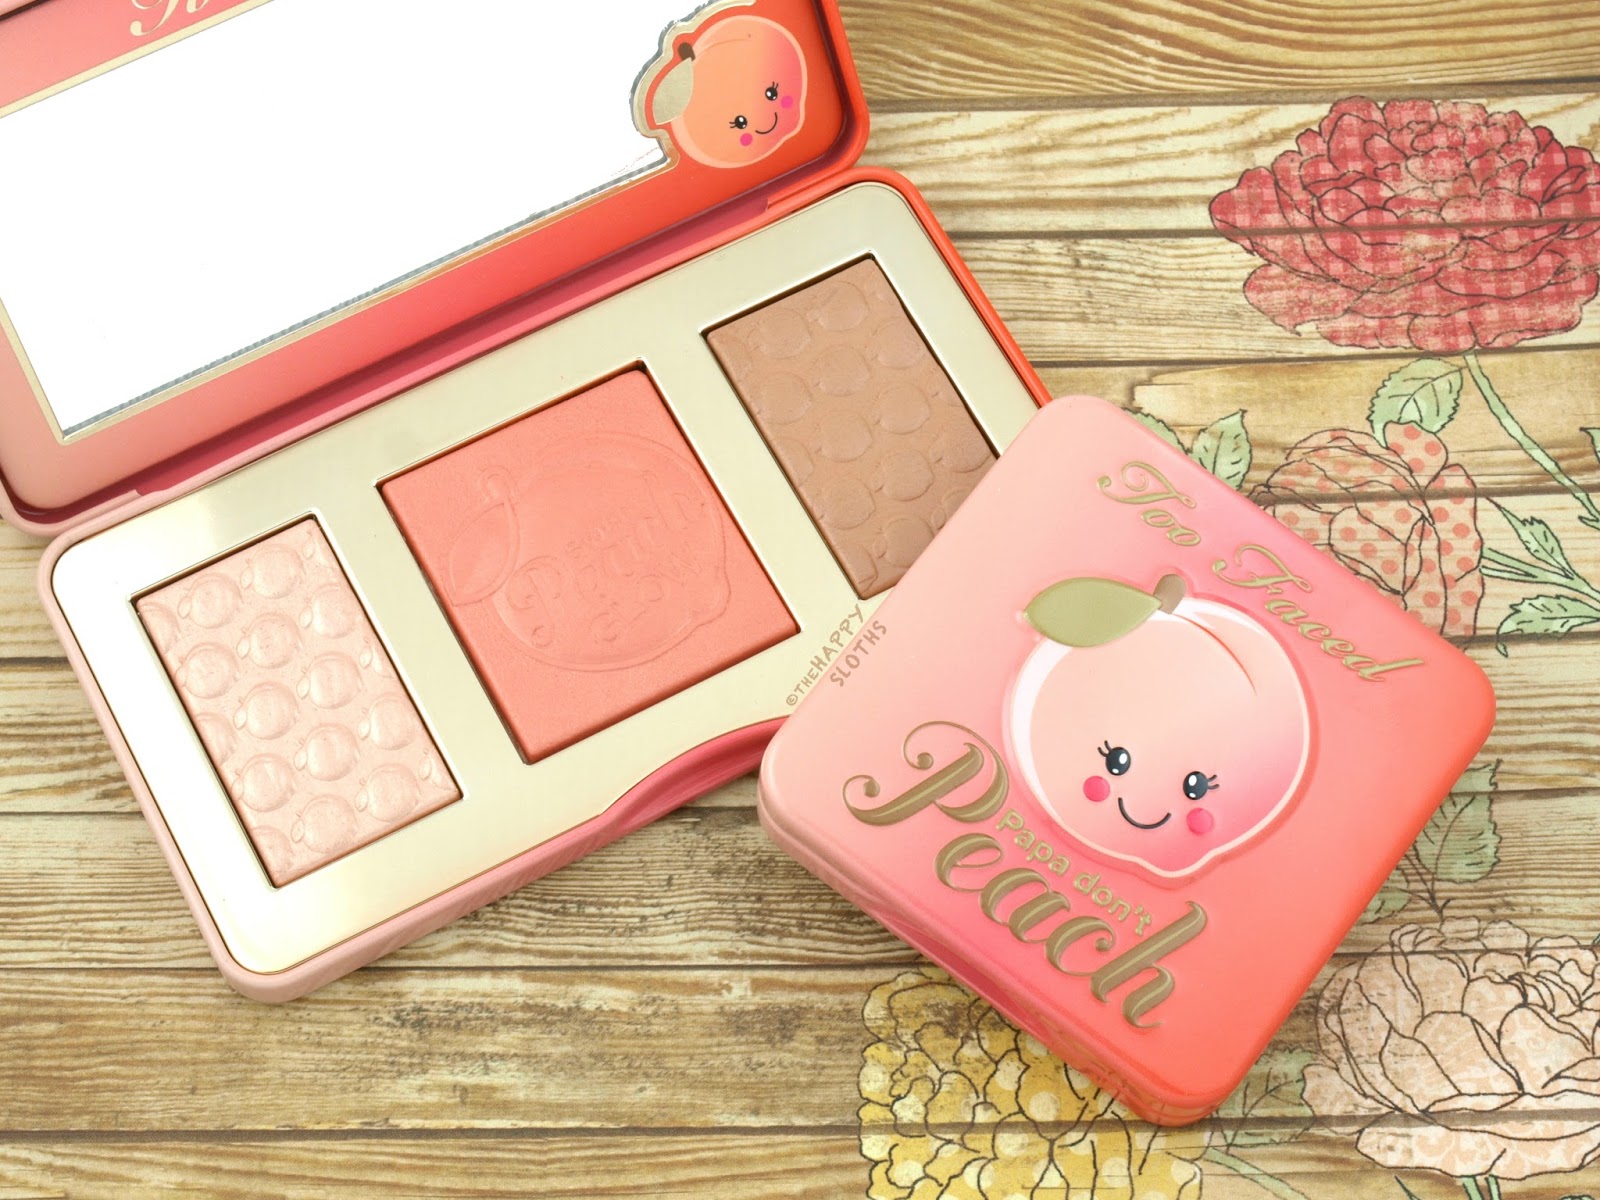 Too Faced Sweet Peach Glow Highlighting Palette & Papa Don't Peach Blush: Review and Swatches 